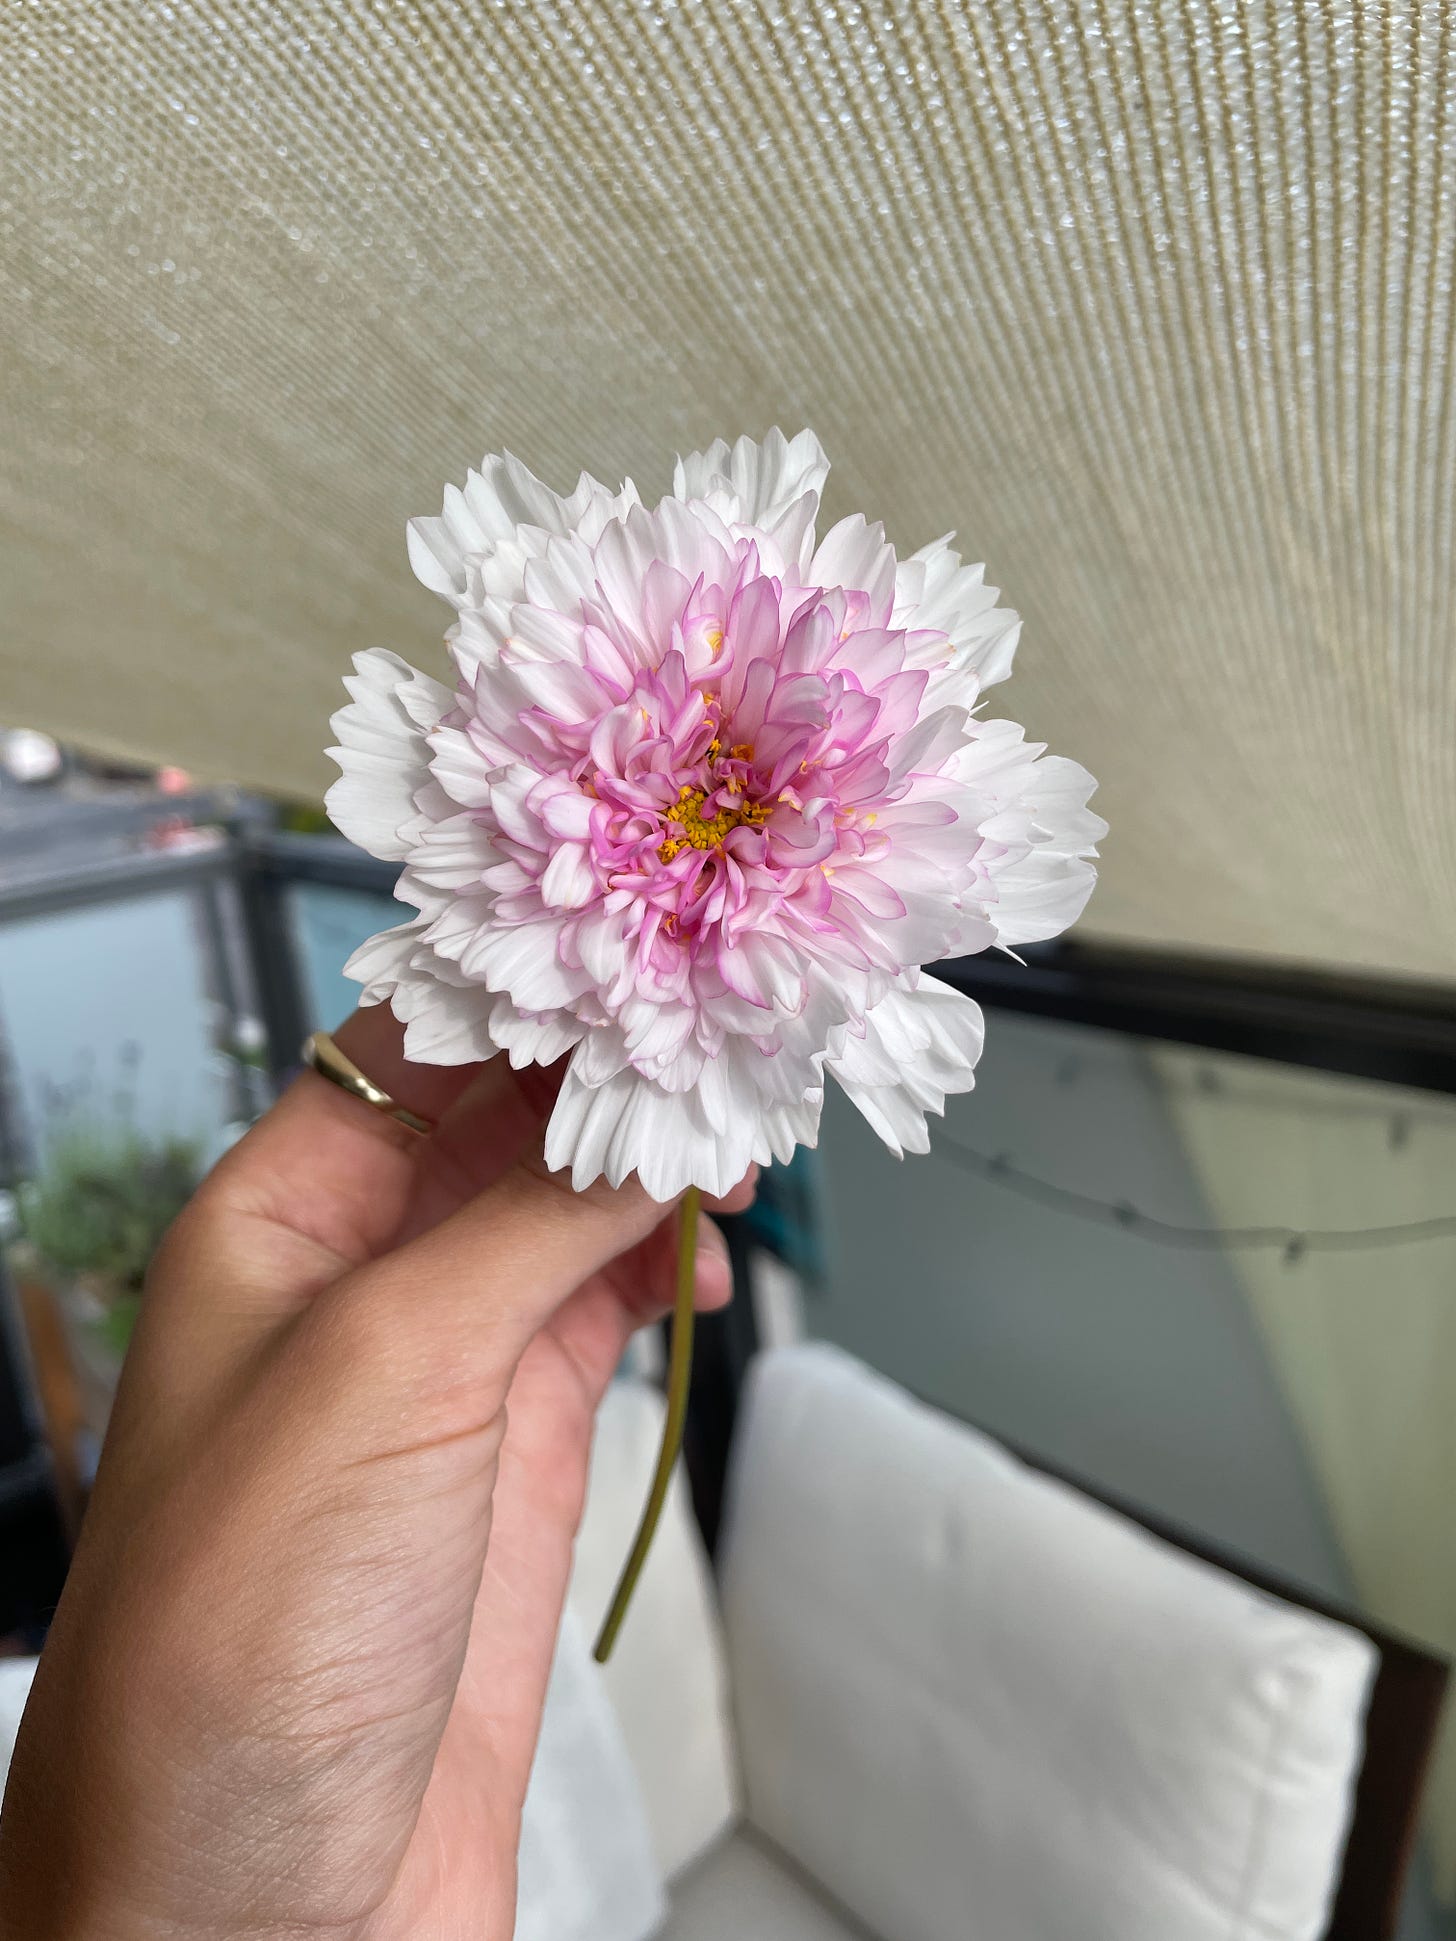 A gorgeous cosmos bloom is held in the left hand of the photographer. The photographers index finger is encircled by a gold band. The petals at the centre of the flower are edged in pink and the petals furthest from the centre are bright white. In the background is a patio sofa and balcony railing with string lights and a sunshade.